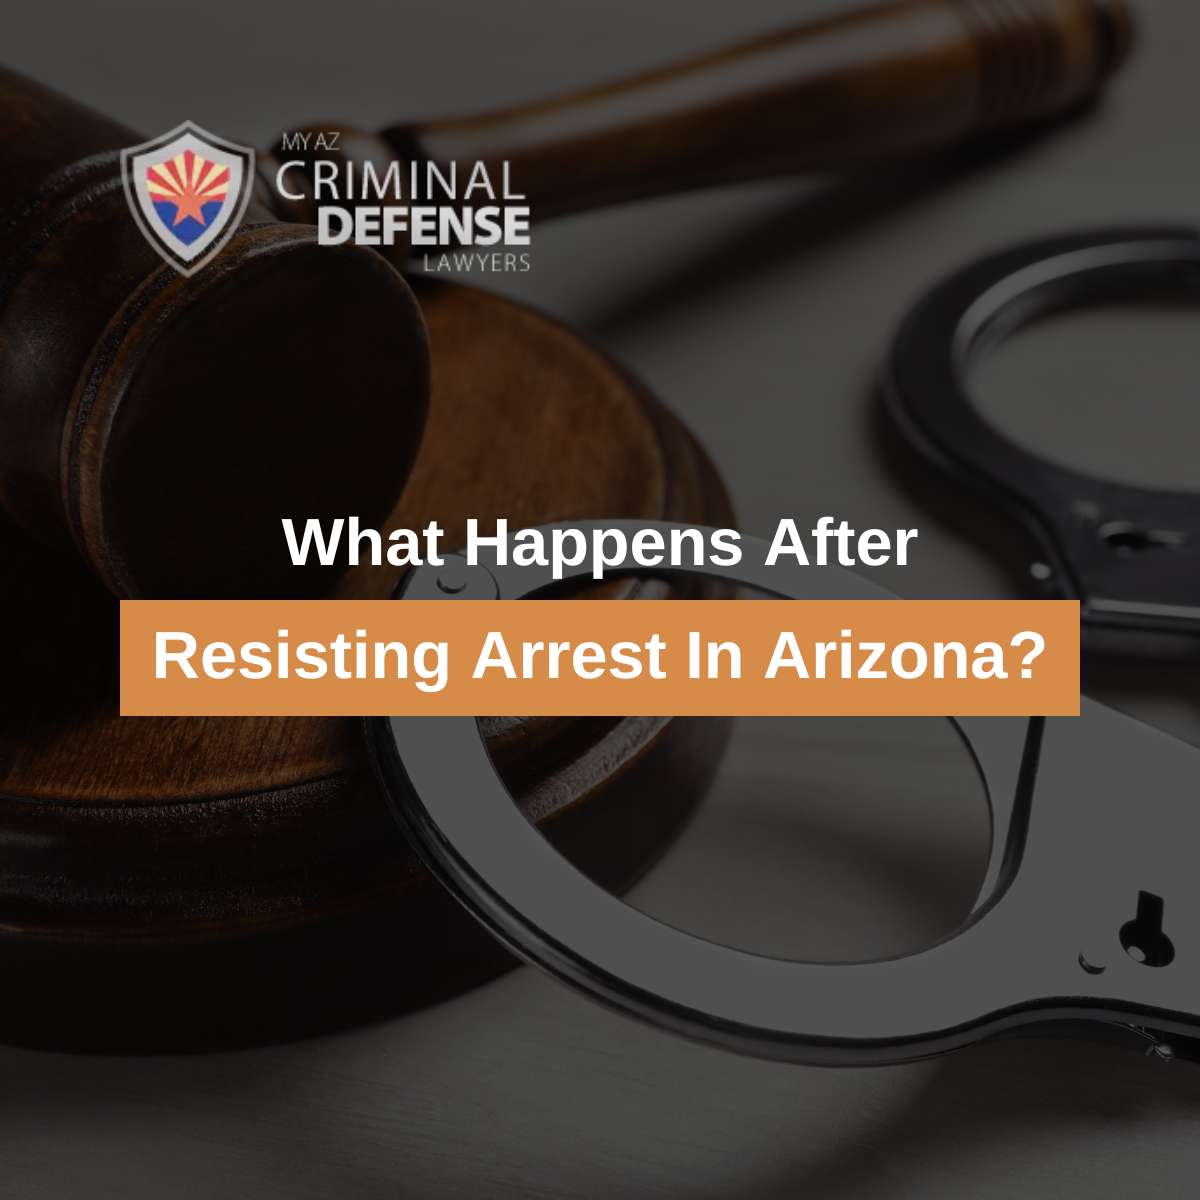 What Happens After Resisting Arrest In Arizona